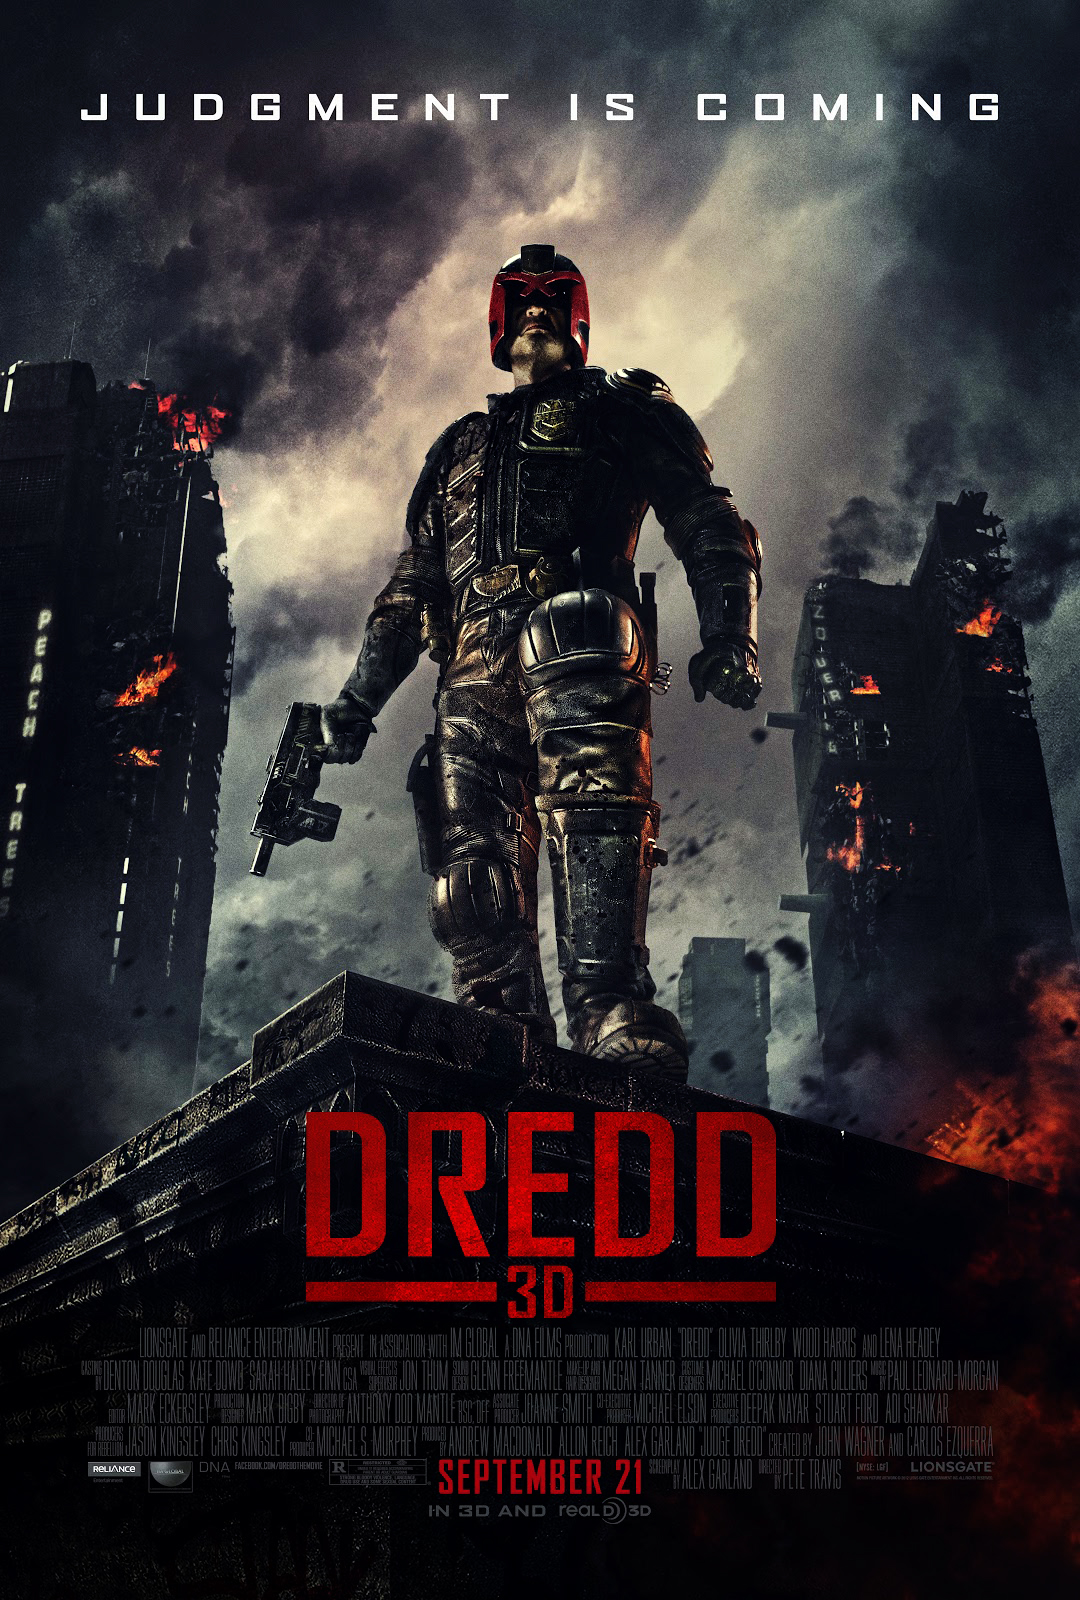 Dredd 3d Movie Poster HD Wallpaper Image To